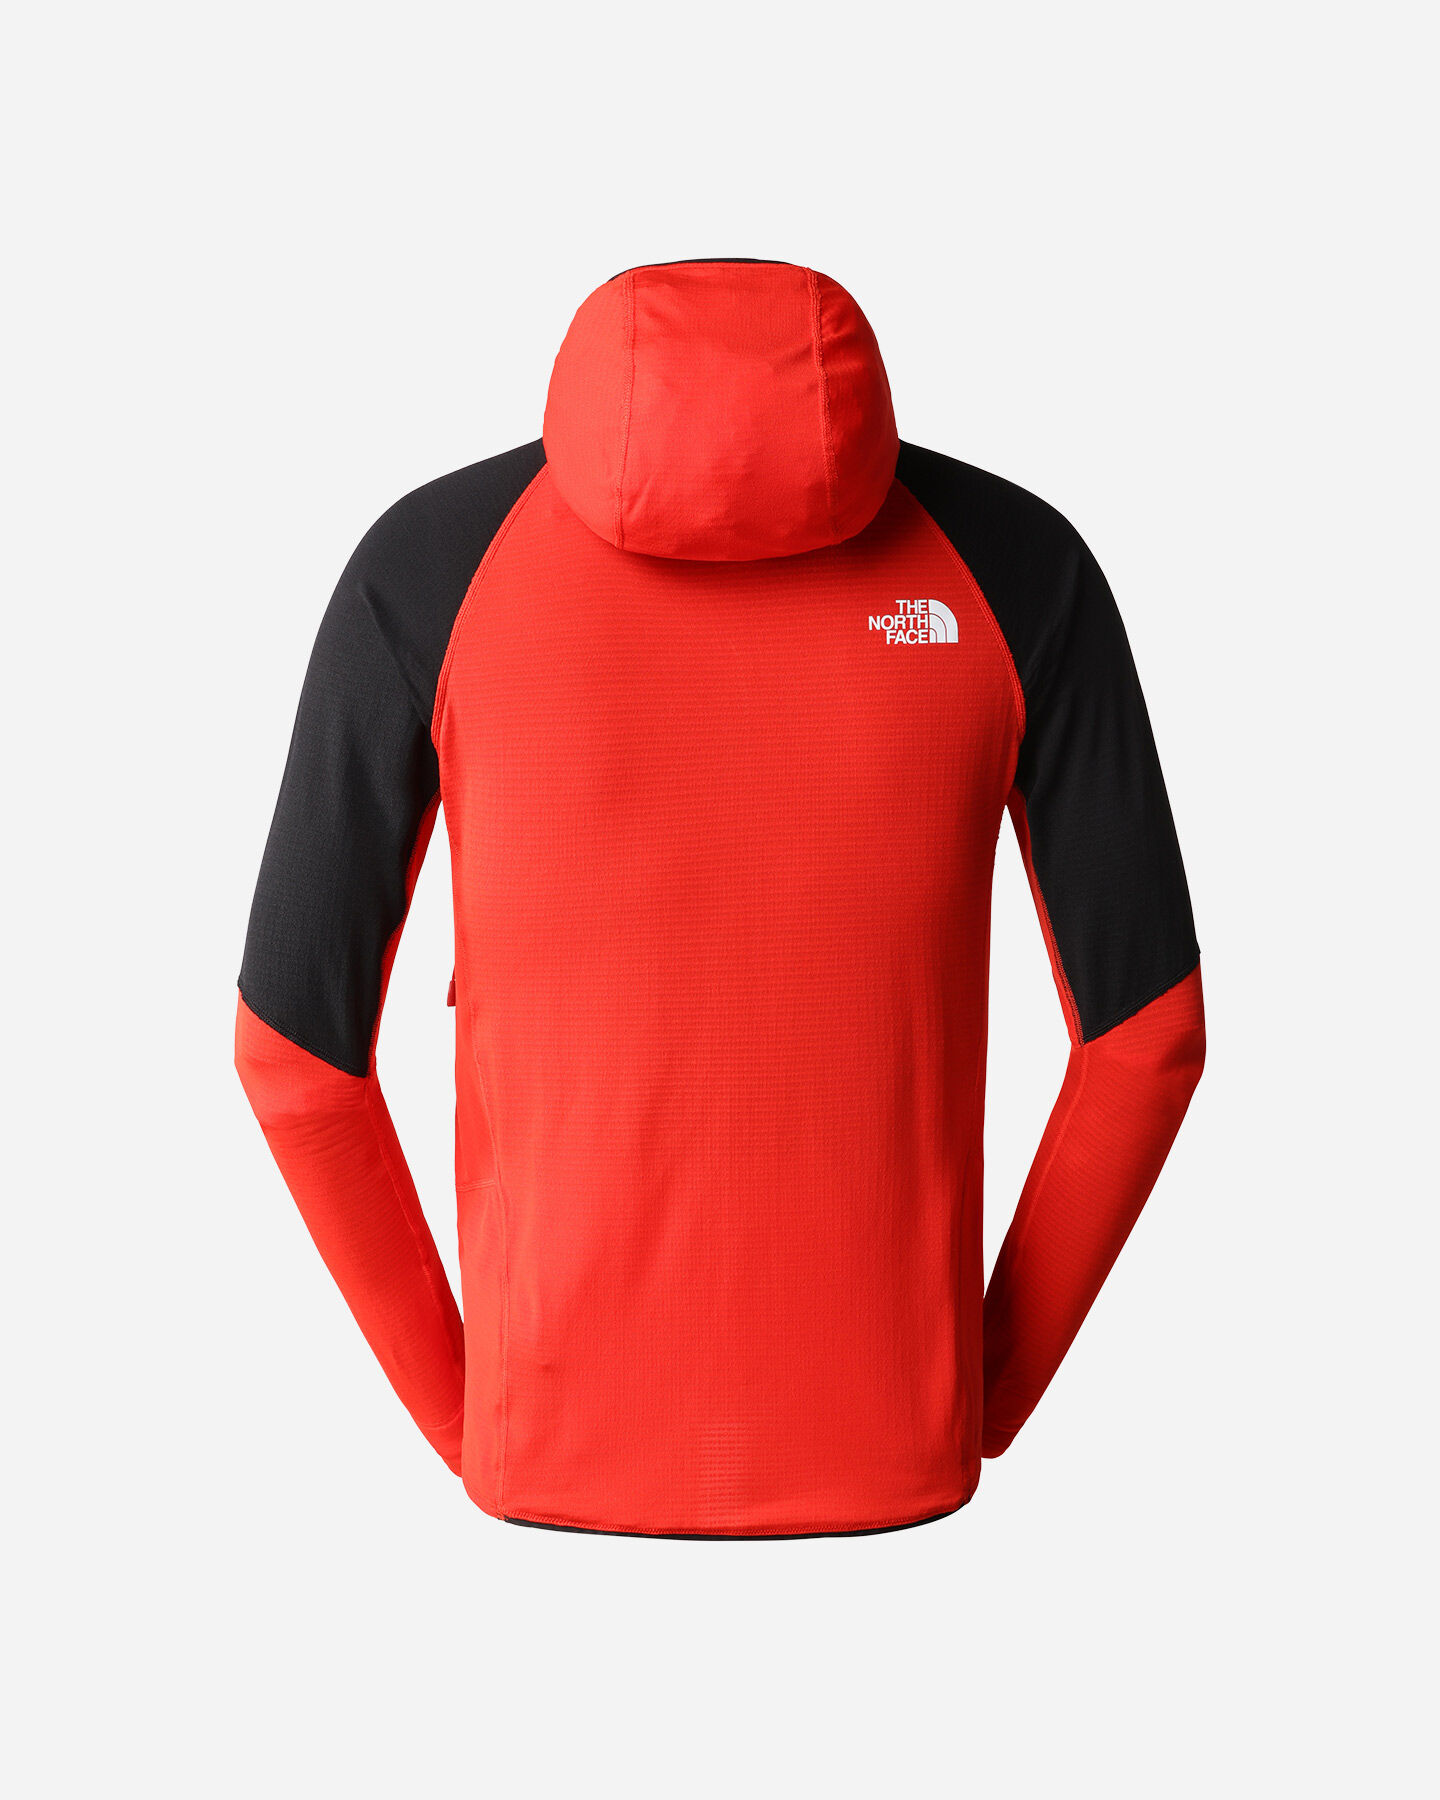  Pile THE NORTH FACE BOLT M S5537077|WU5|S scatto 1